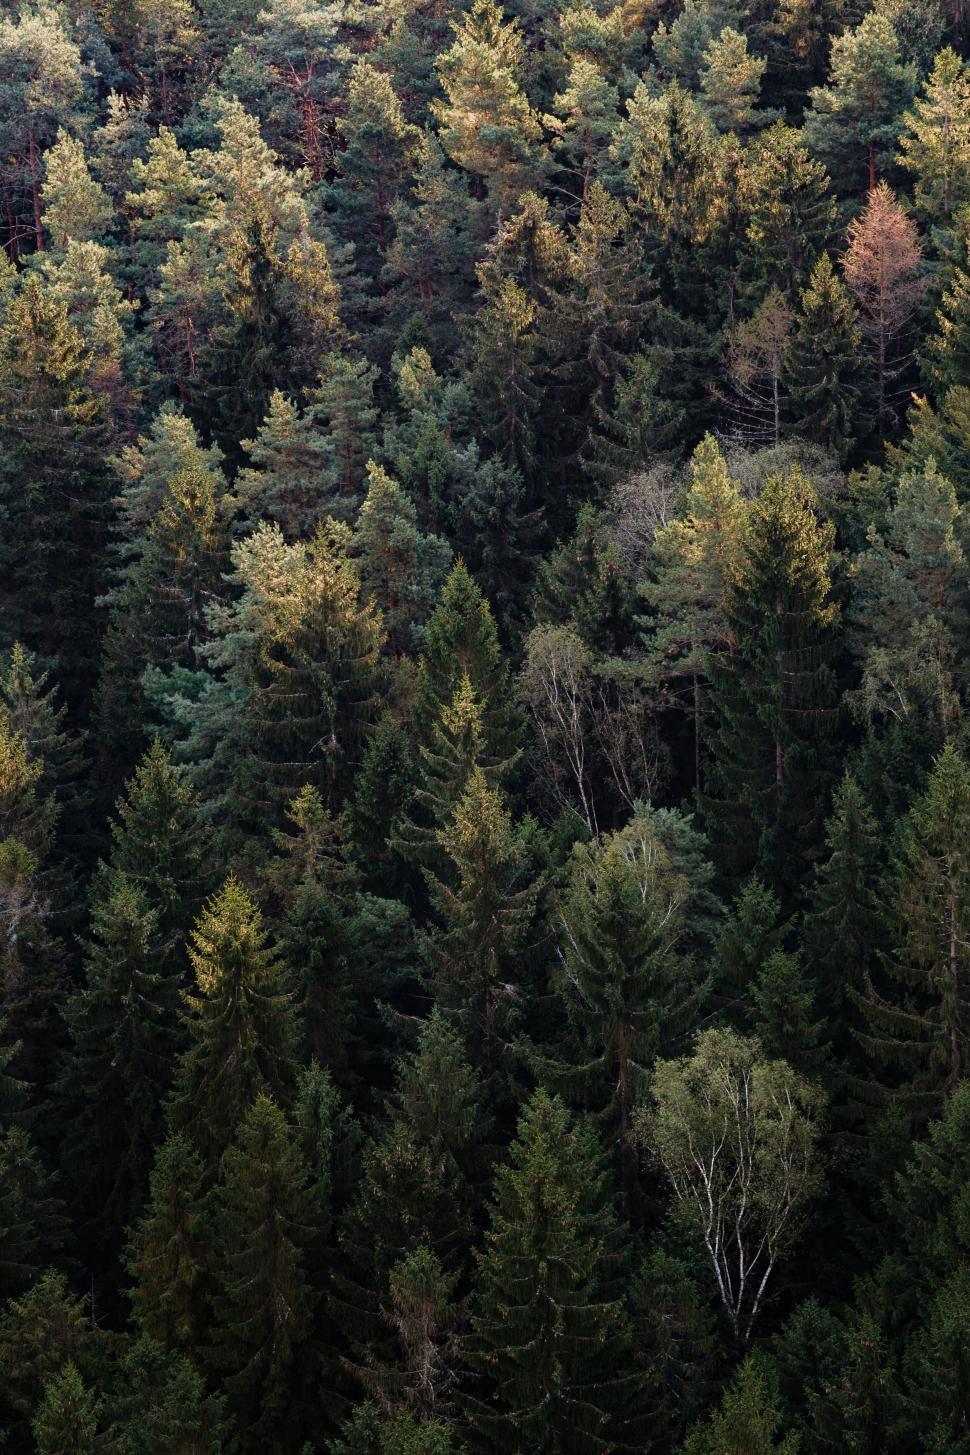 Free Image of Towering Trees Dominating Forest Canopy 